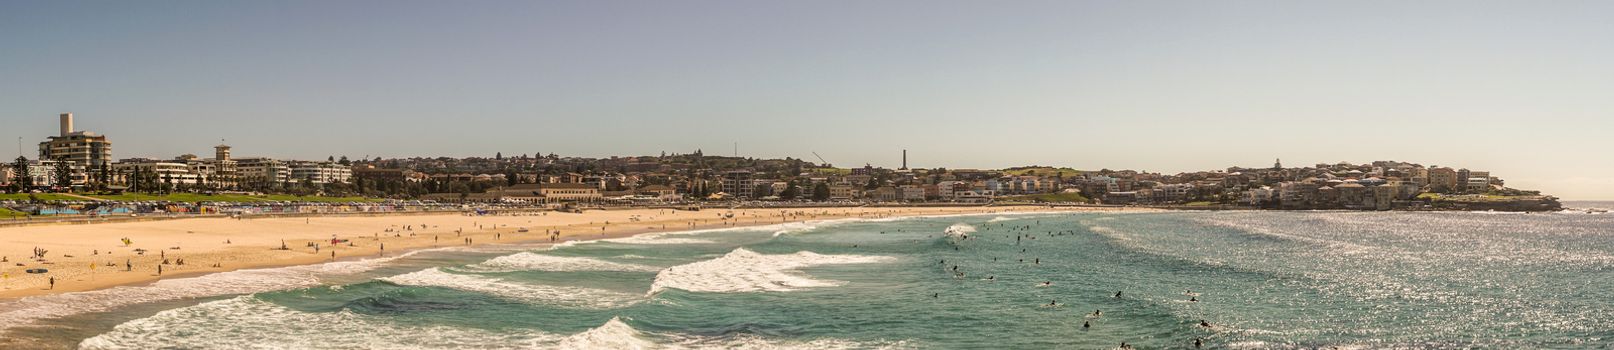 Sydney, Australia - February 11, 2019:  Panorama shot of sandy Bondi beach part and its north shore with housing and nature reserves. Blue water and sky.